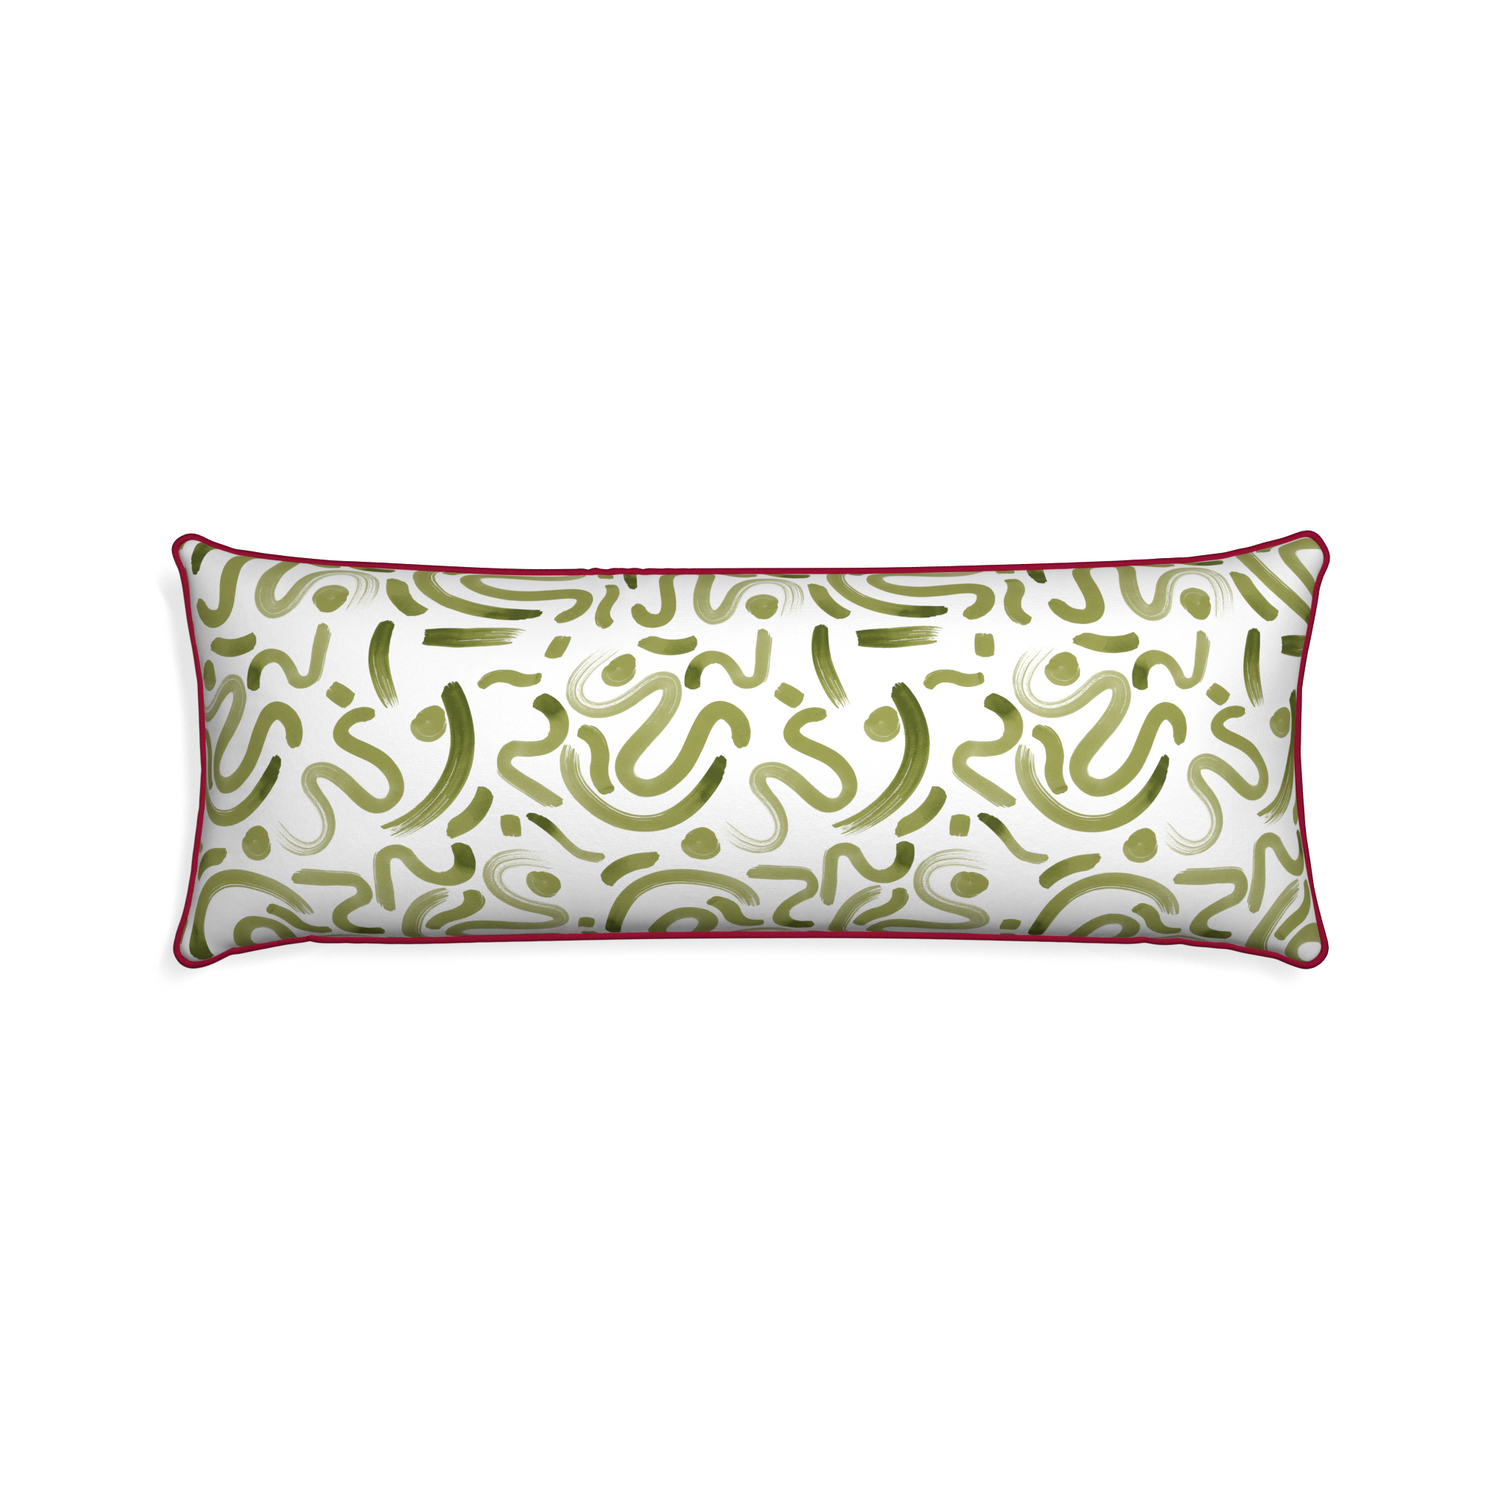 Xl-lumbar hockney moss custom pillow with raspberry piping on white background